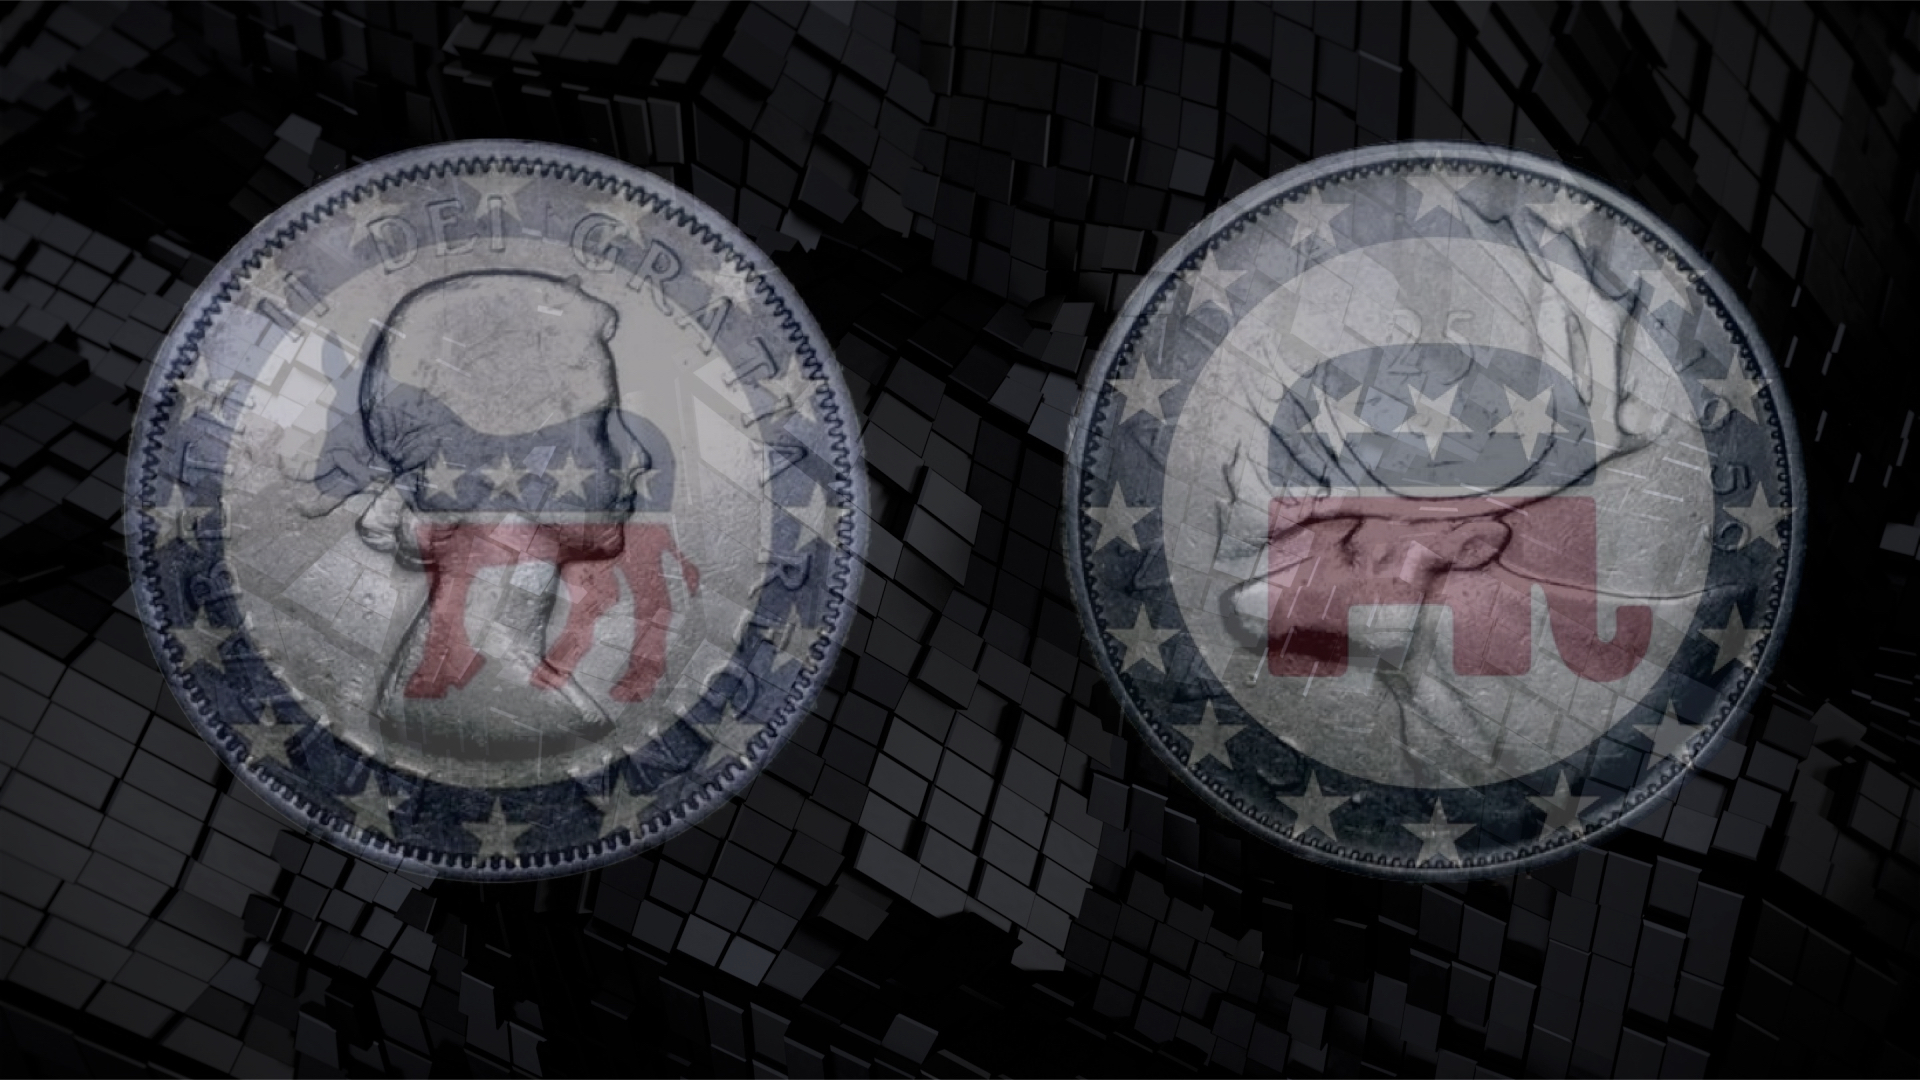 TWO SIDES OF THE SAME CORRUPT COIN: Scenarios for the 2022 Midterms